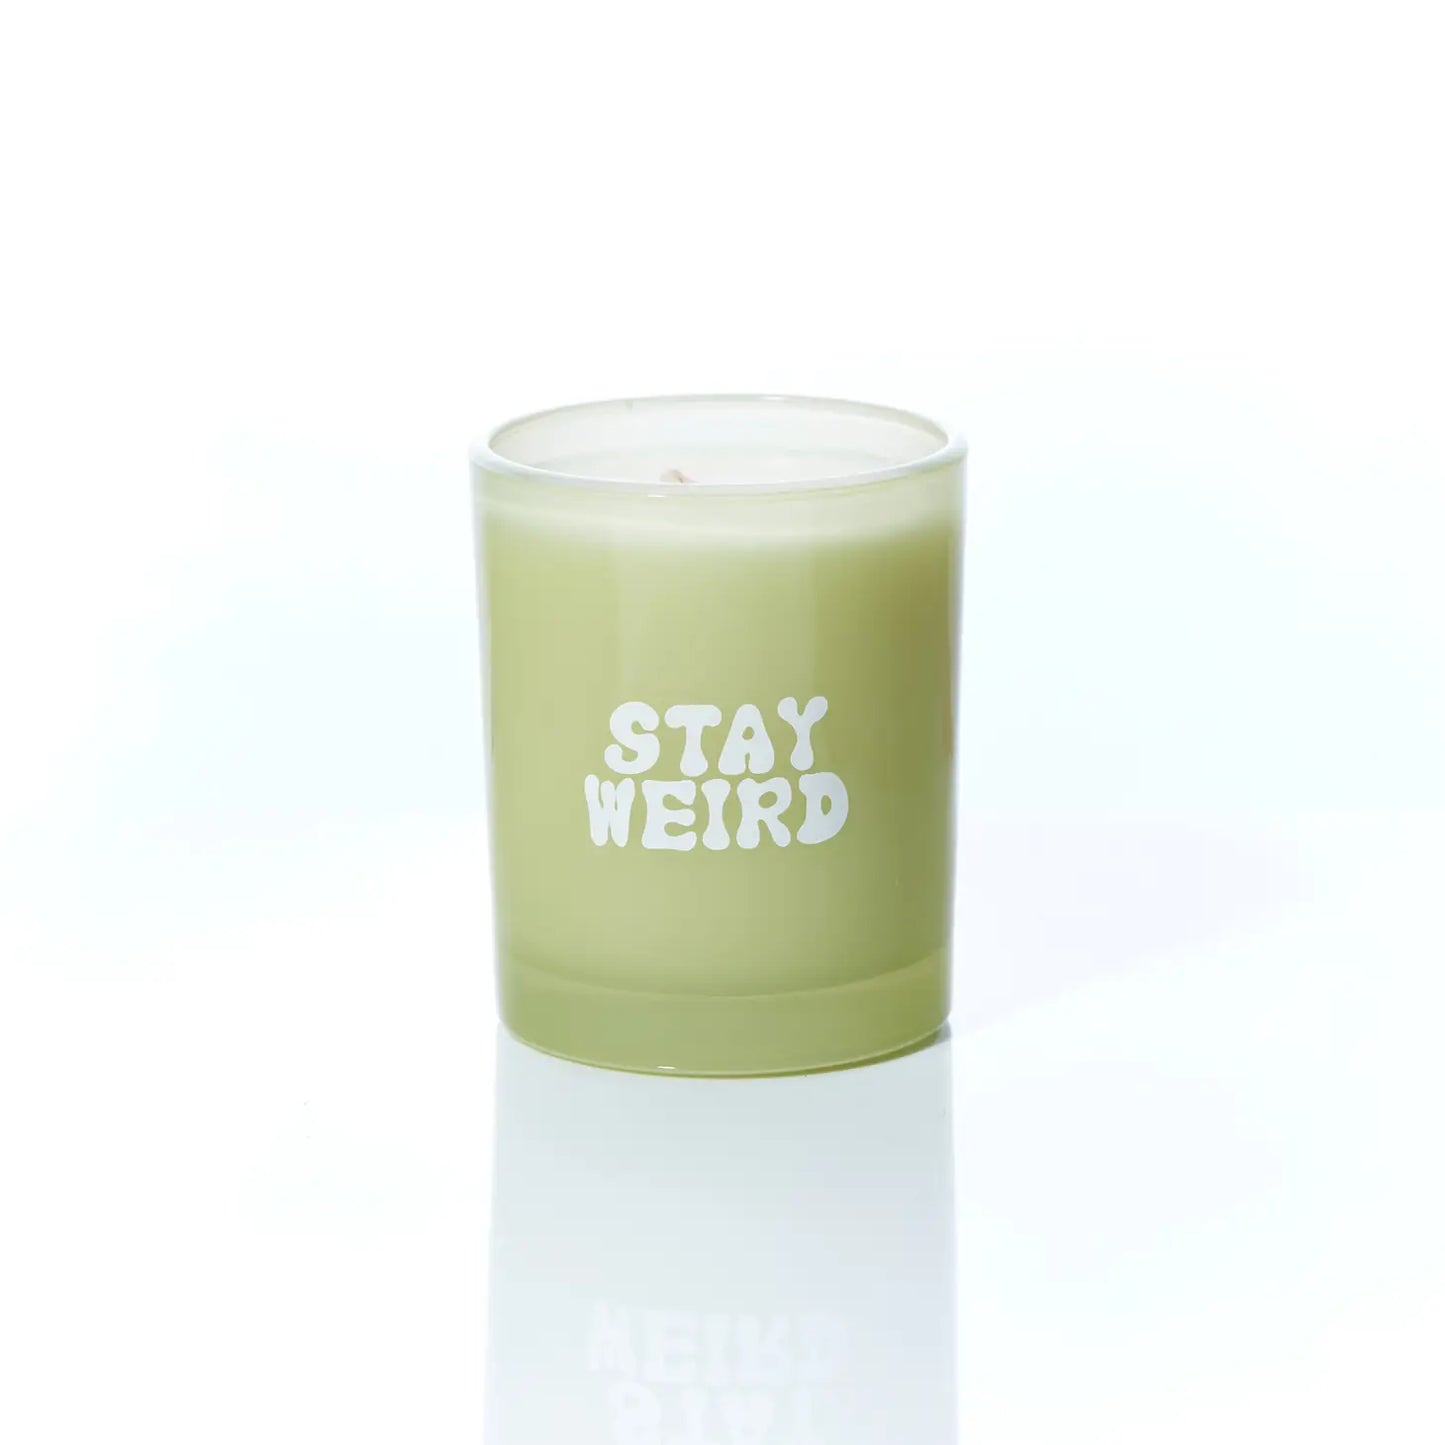 Vibe By Maegen — 'Stay Weird' Candle